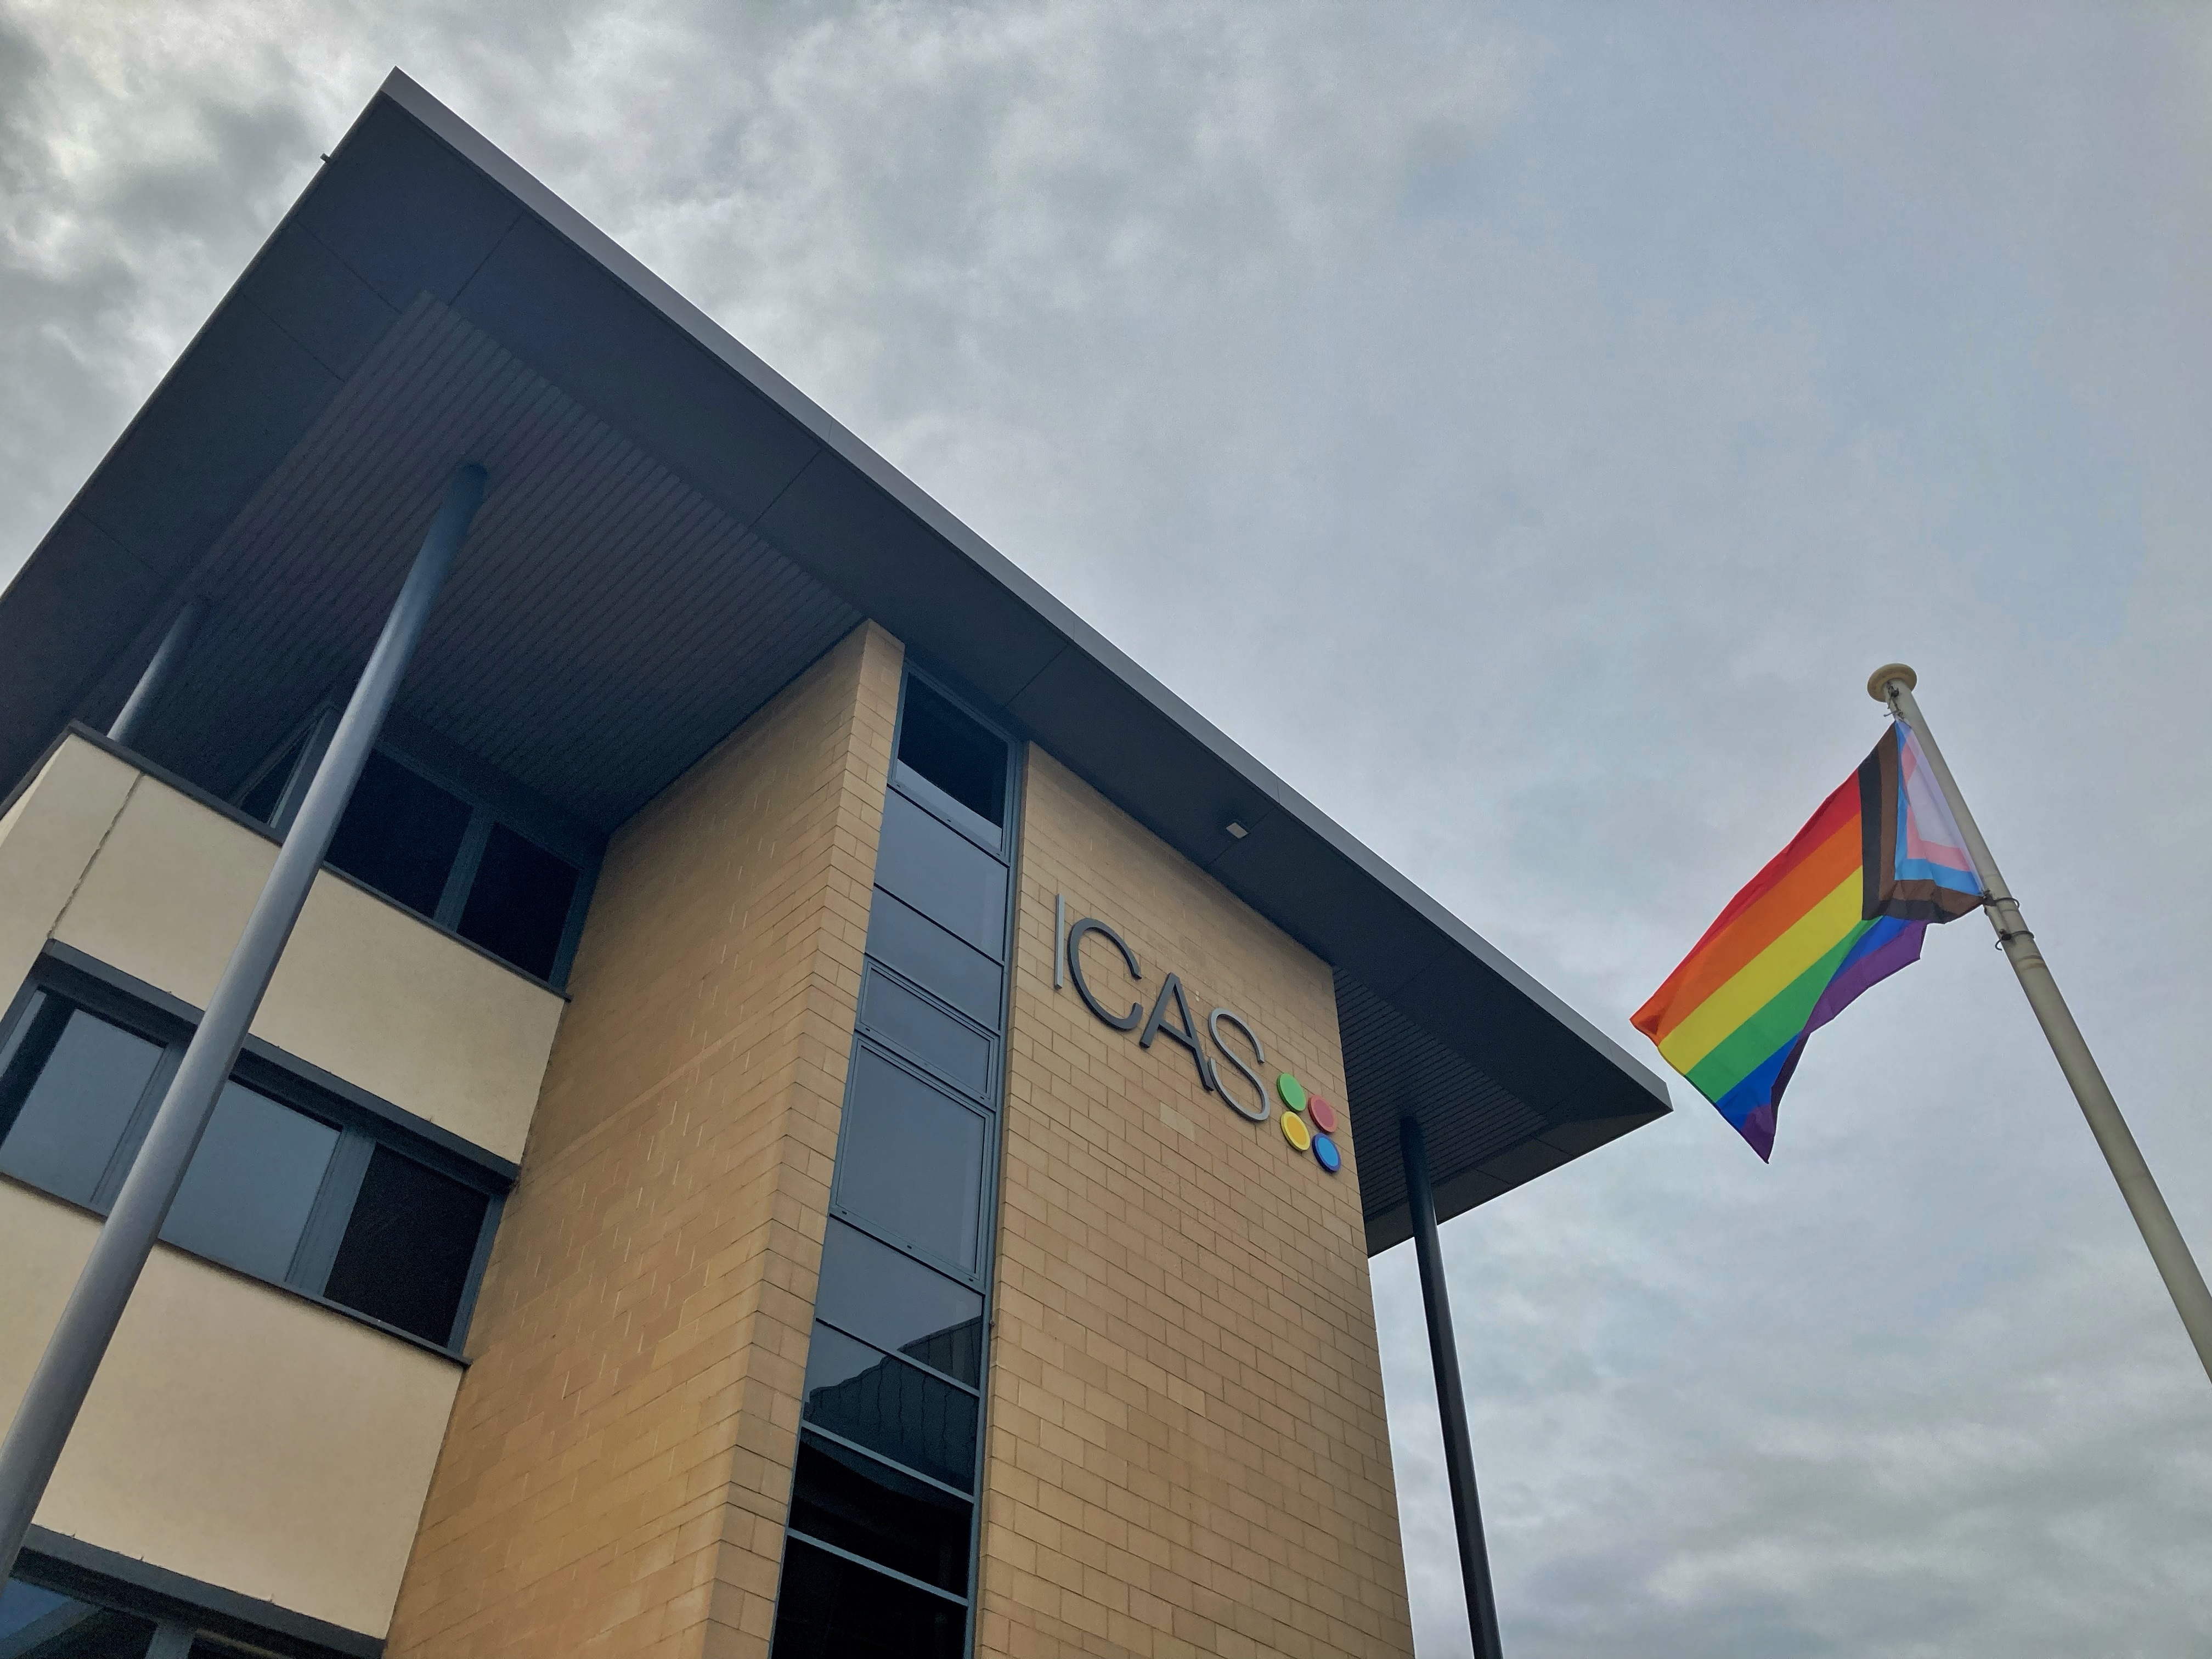 Rainbow flag flying in front of the ICAS office